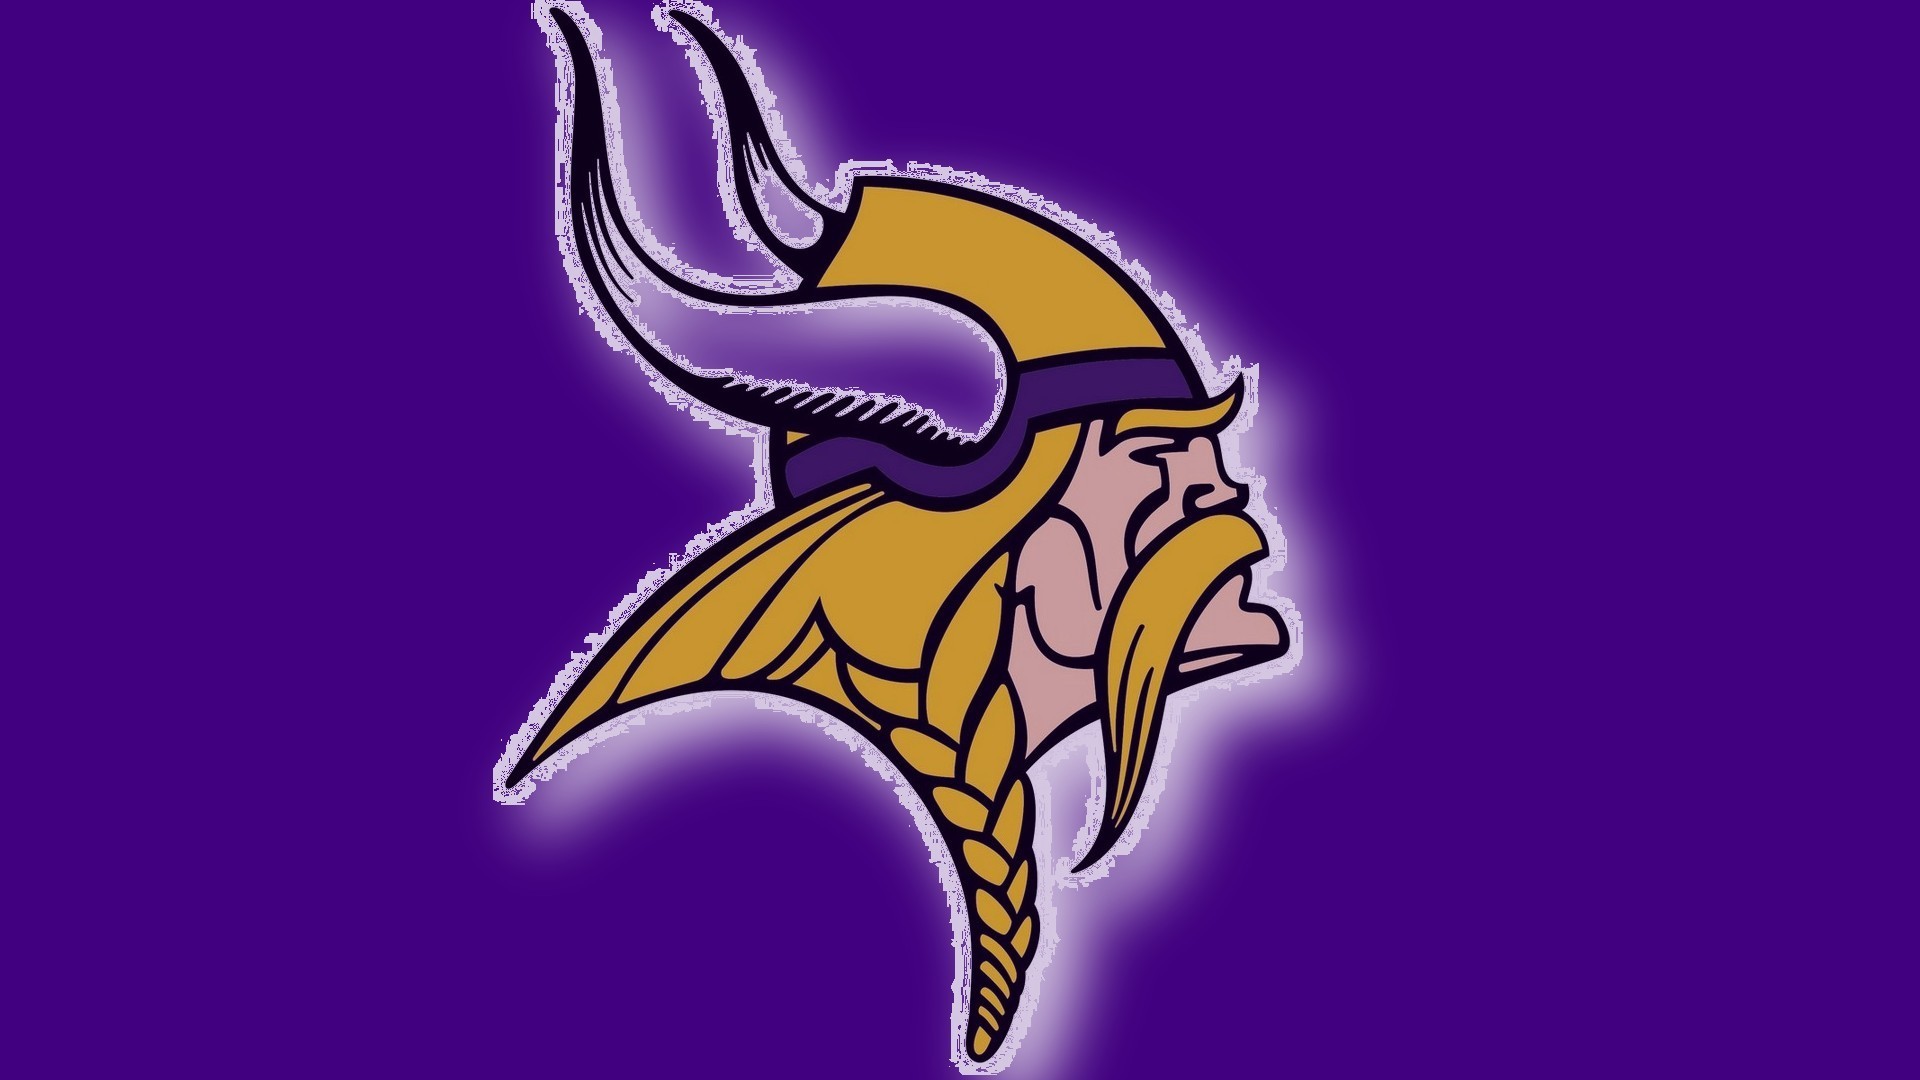 1920x1080 HD Minnesota Vikings Wallpapers with resolution  pixel. You can  make this wallpaper for your